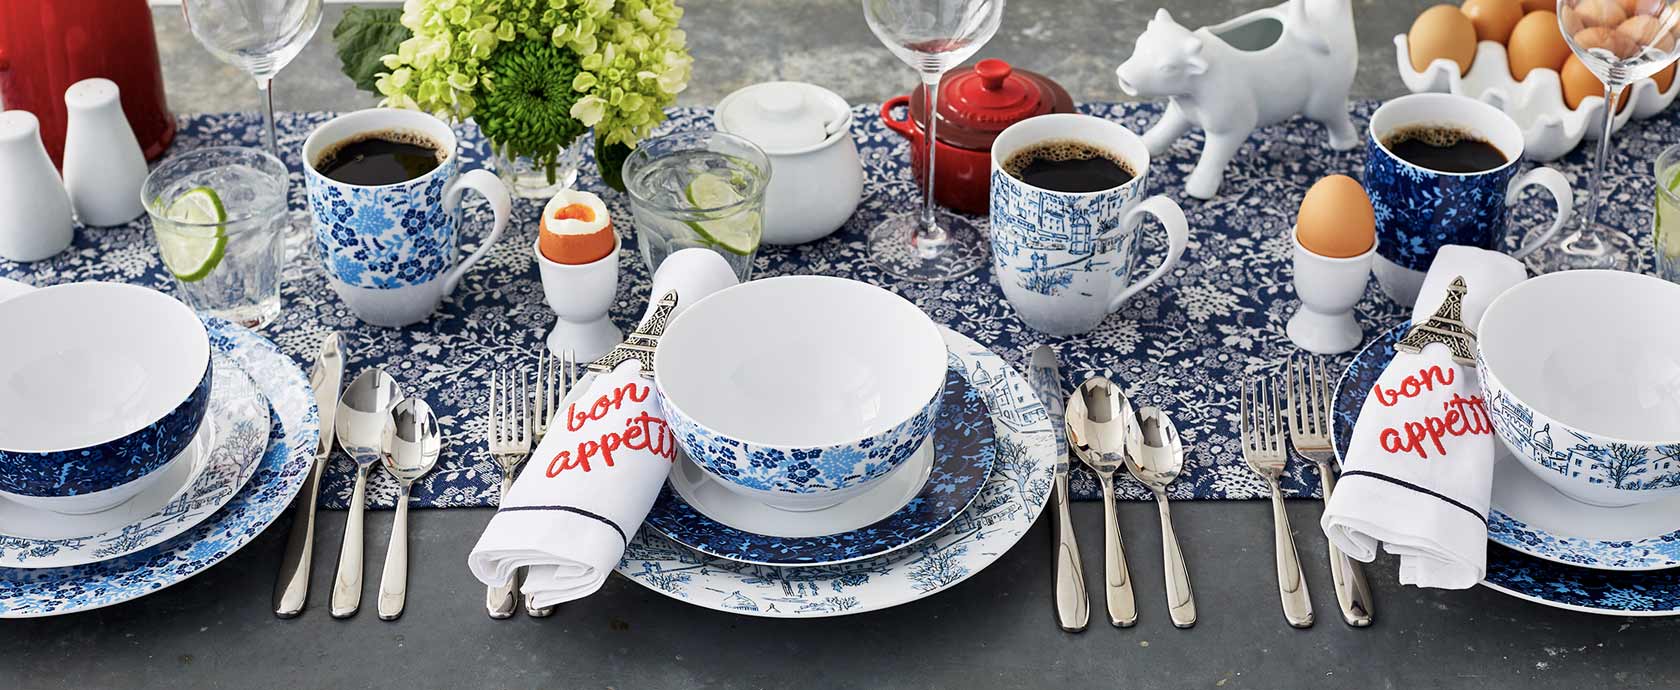 New Maison blue and white floral dinnerware and linens